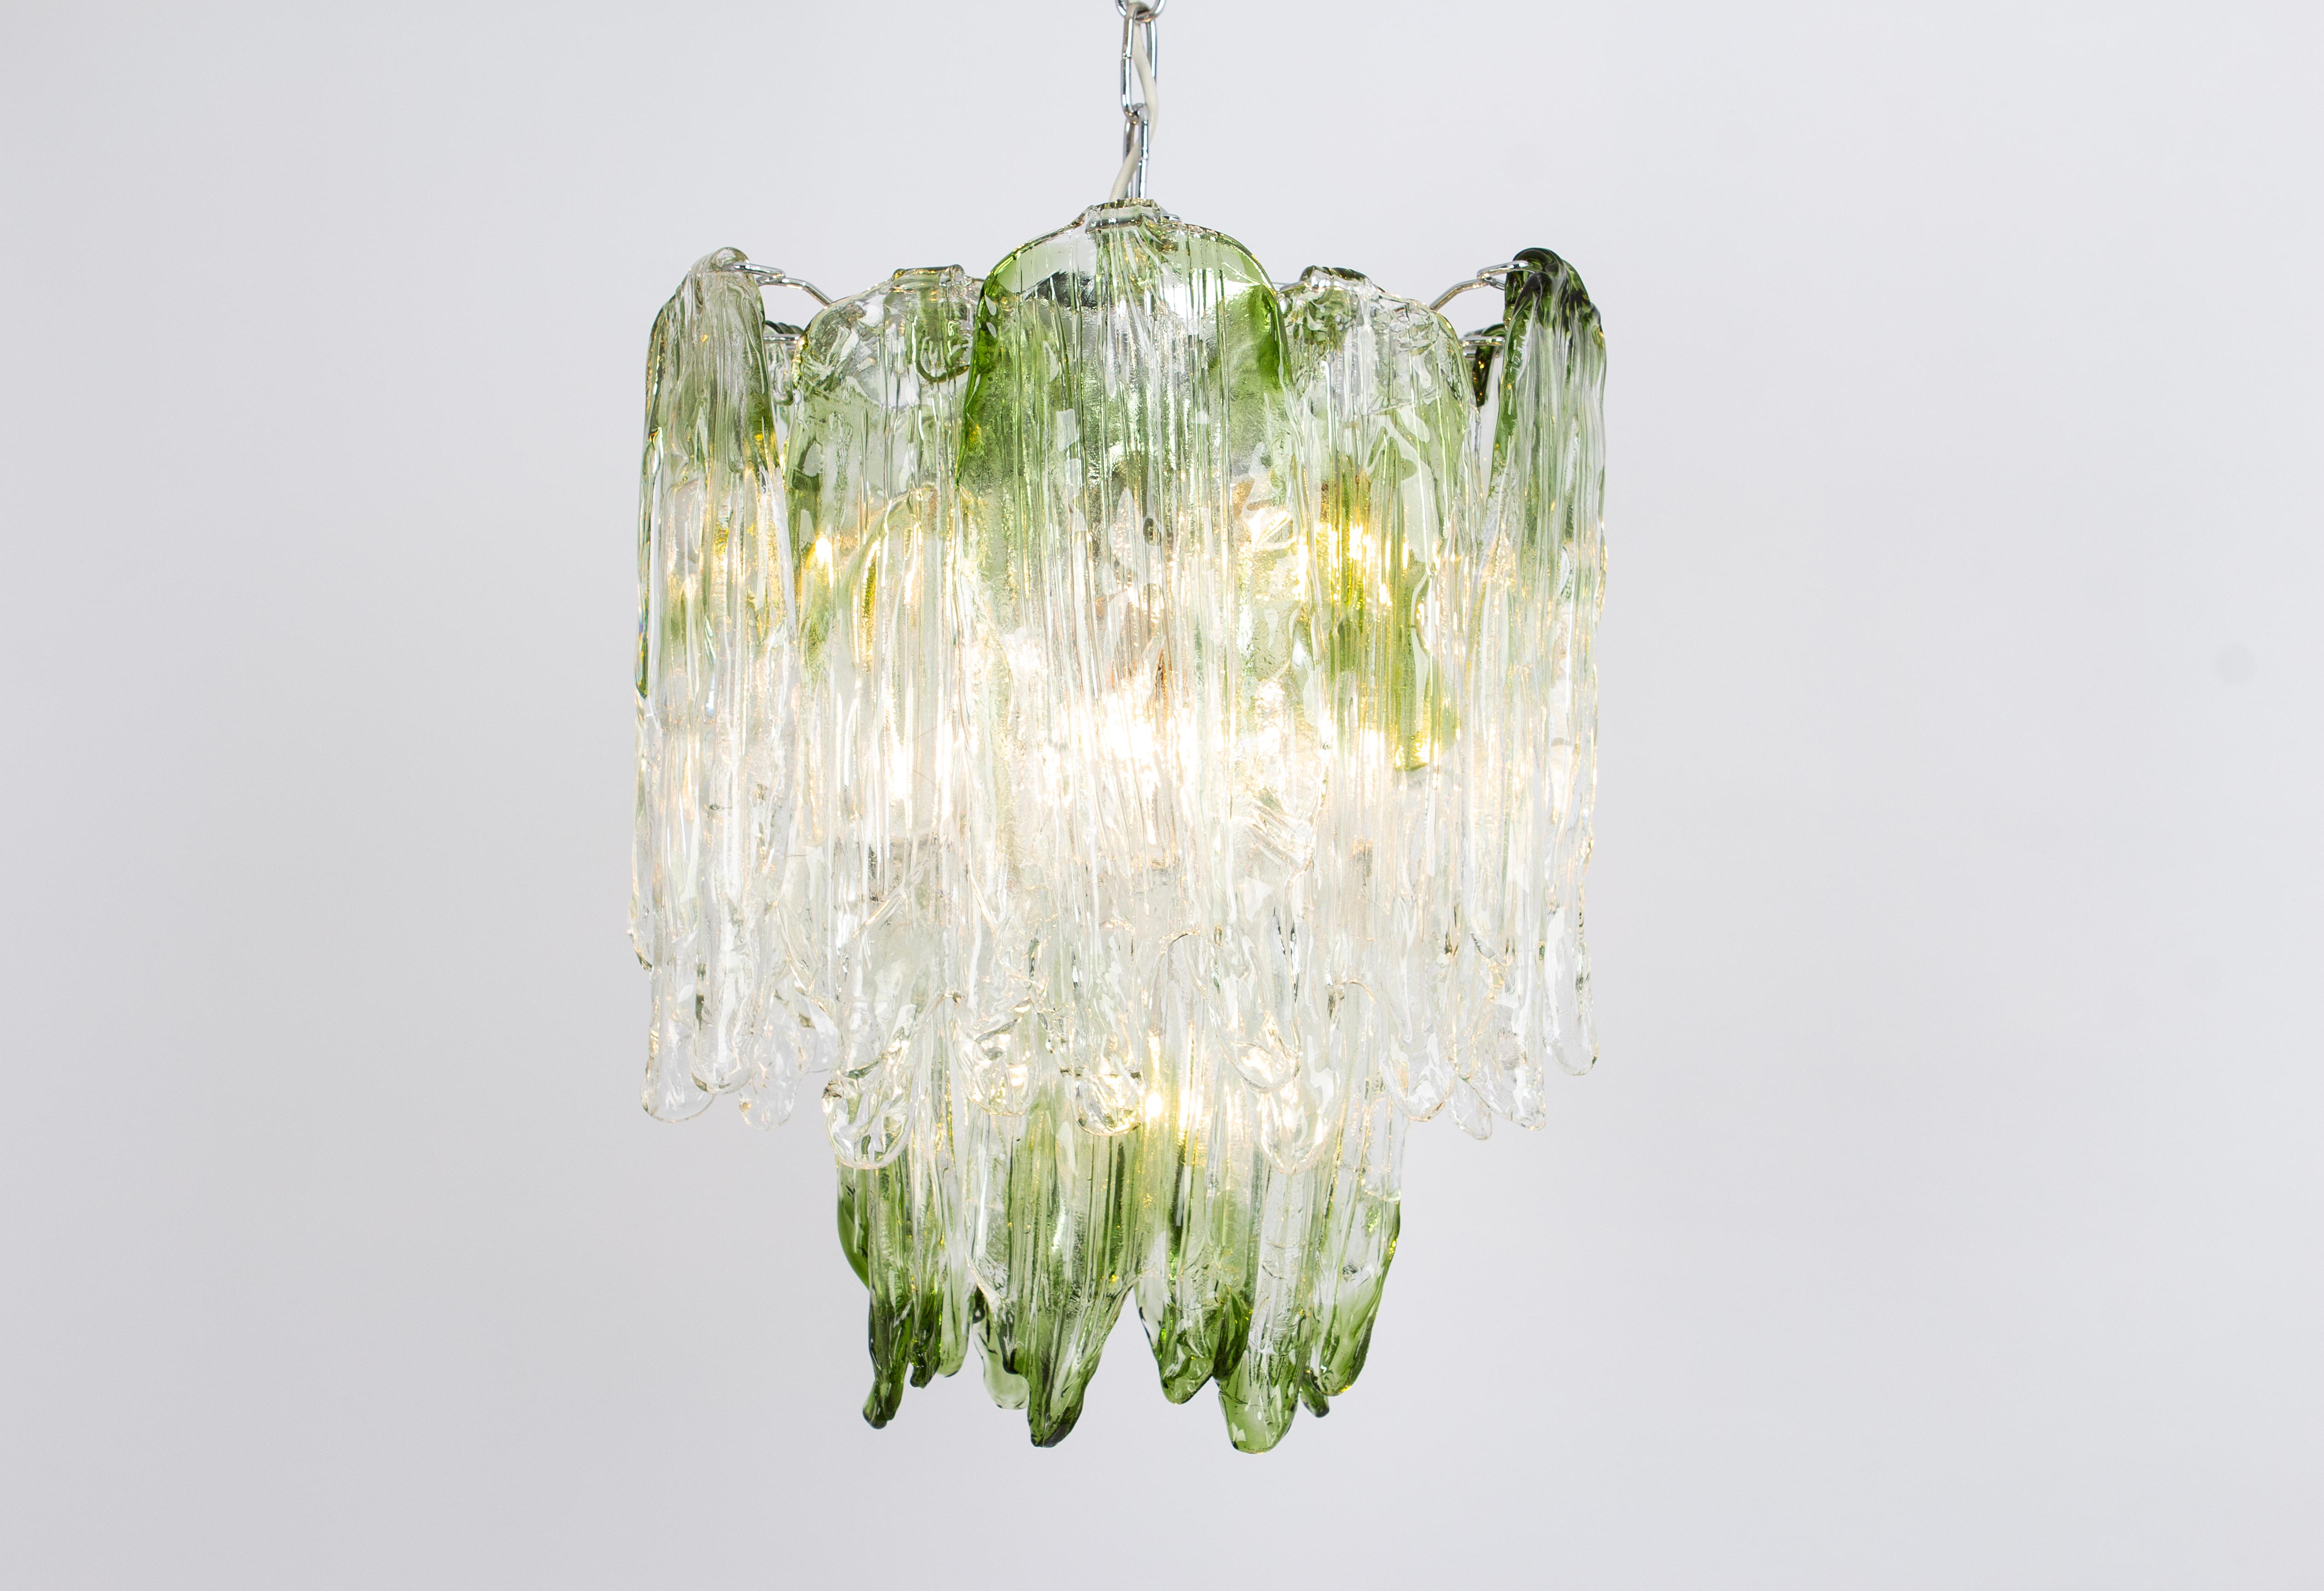 Wonderful floral pendant light featuring structured clear Murano glass with green inclusions forming glass petals, supported by a metal frame. Made by Mazzega, Italy, in the 1970s.

Heavy quality and in very good condition. Cleaned, well-wired and